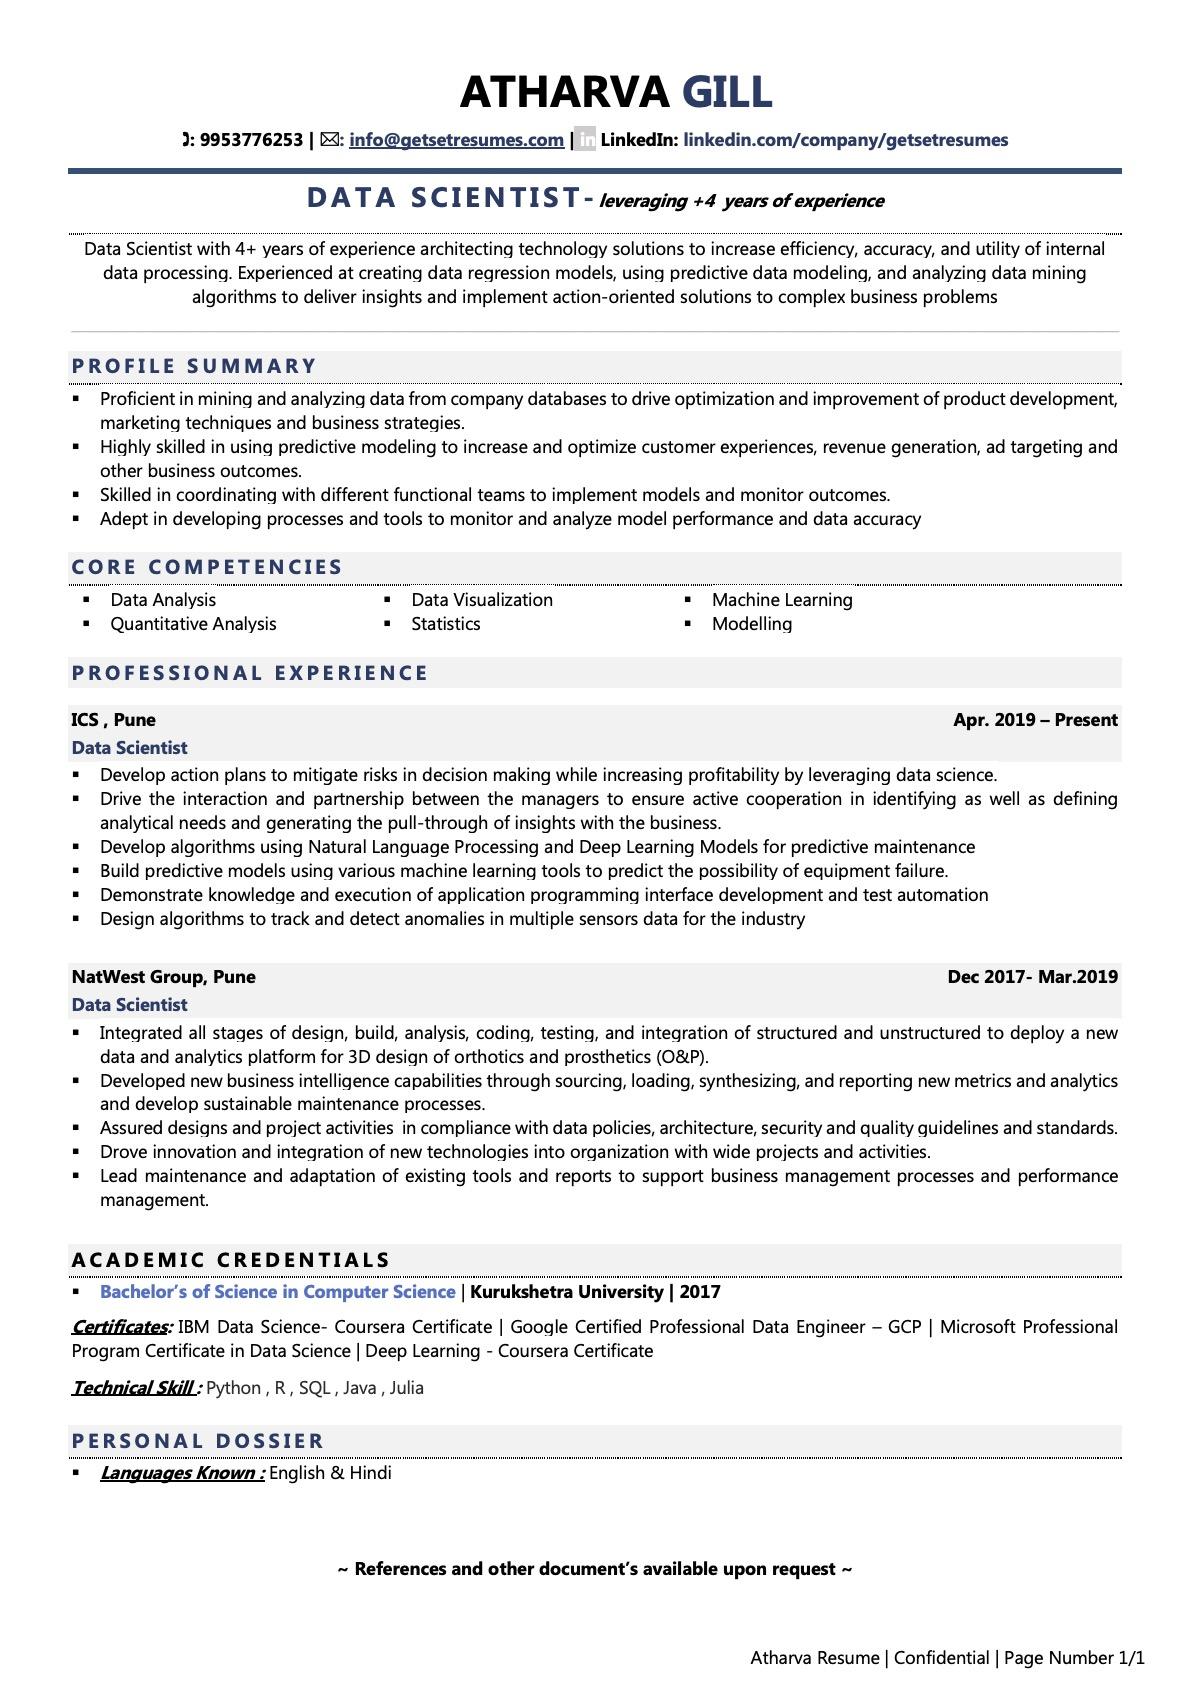 Data Scientist Resume Examples & Template (with job winning tips)